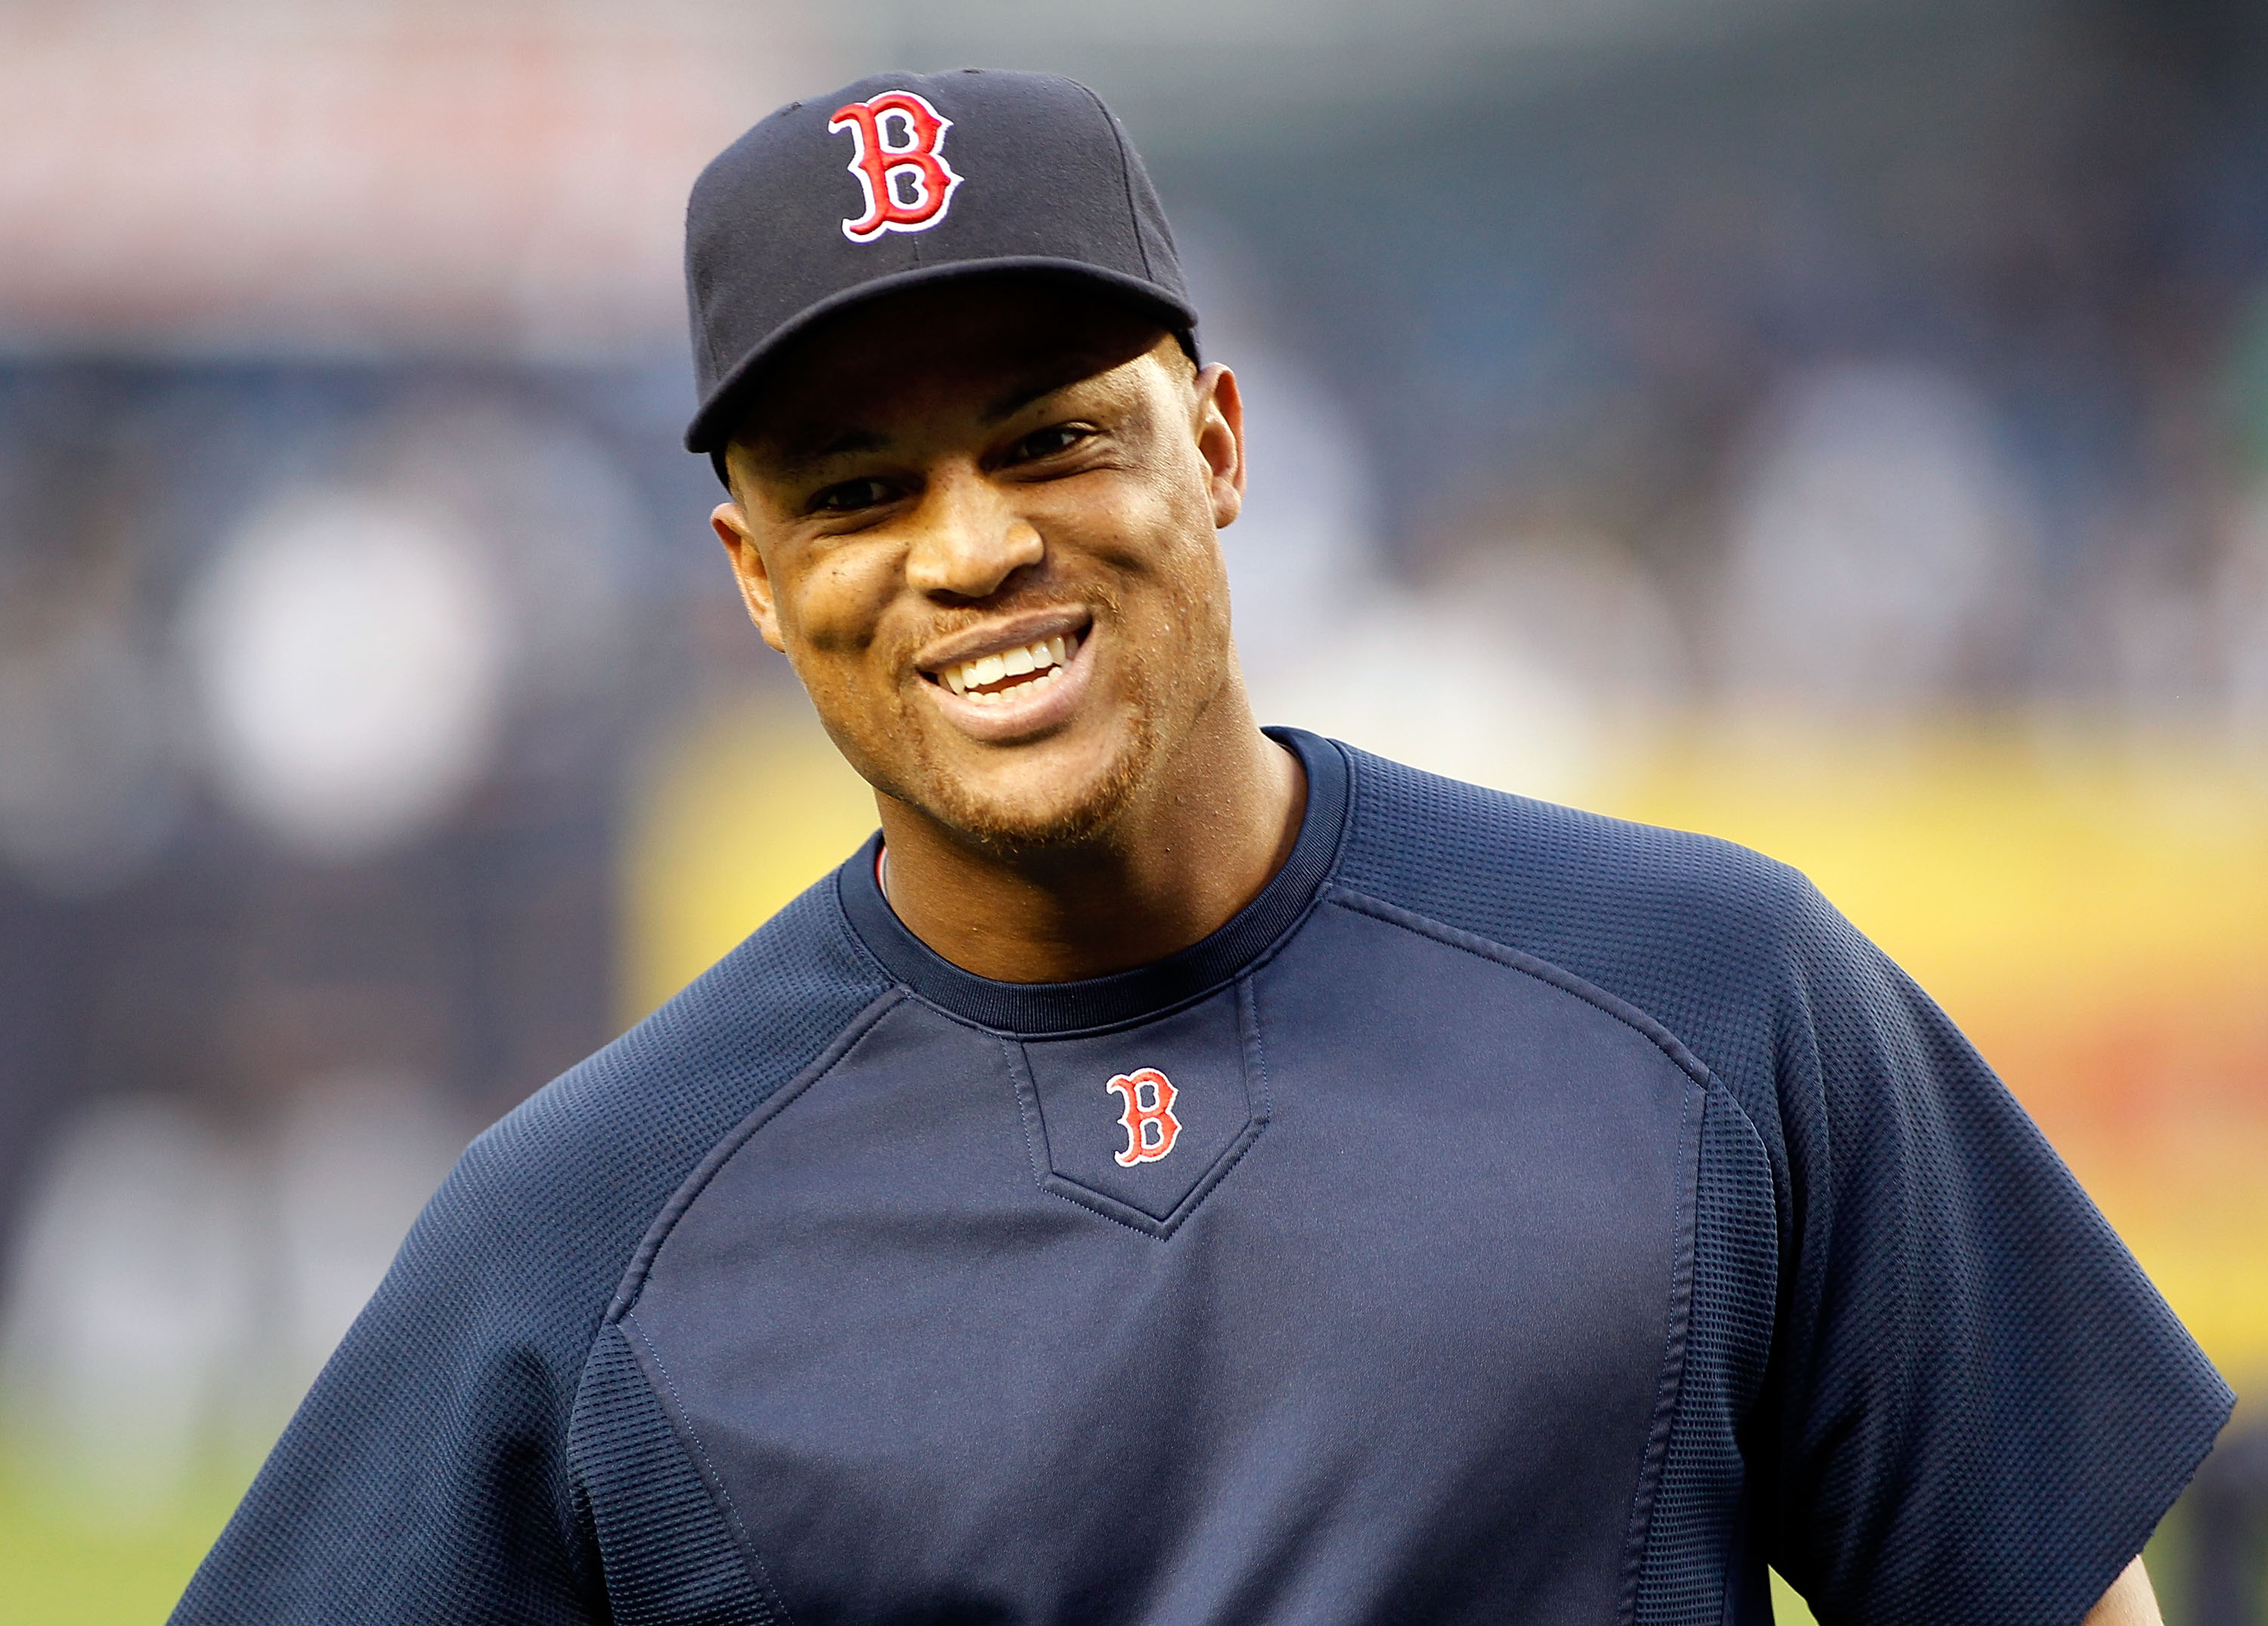 NEW YORK - SEPTEMBER 26:  Adrian Beltre #29 of the Boston Red Sox looks on during warm-ups prior to the start of the game against the New York Yankees on September 26, 2010 at Yankee Stadium in the Bronx borough of New York City.  (Photo by Mike Stobe/Get